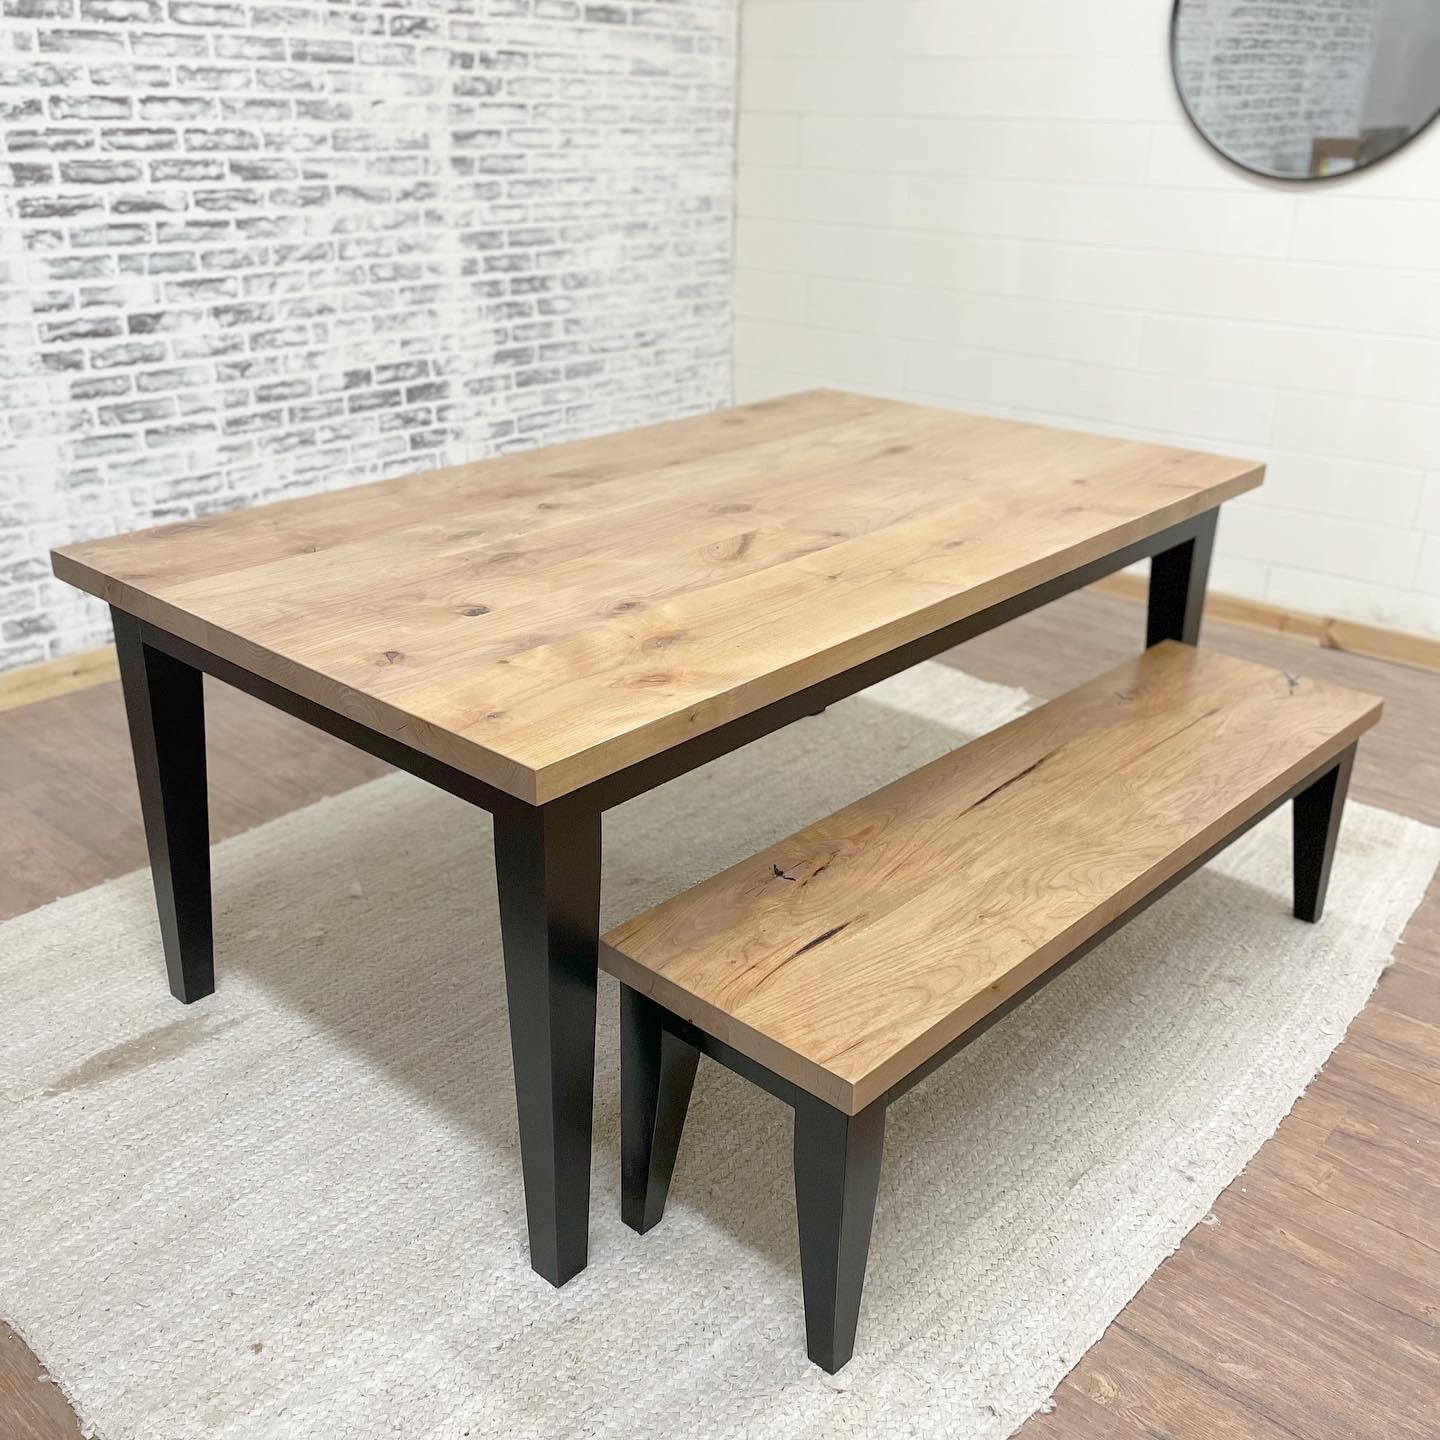 Pictured with a 6' L x 42" W Rustic Alder top stained Weathered Oak and a Black painted base. Pictured with a Matching Bench.